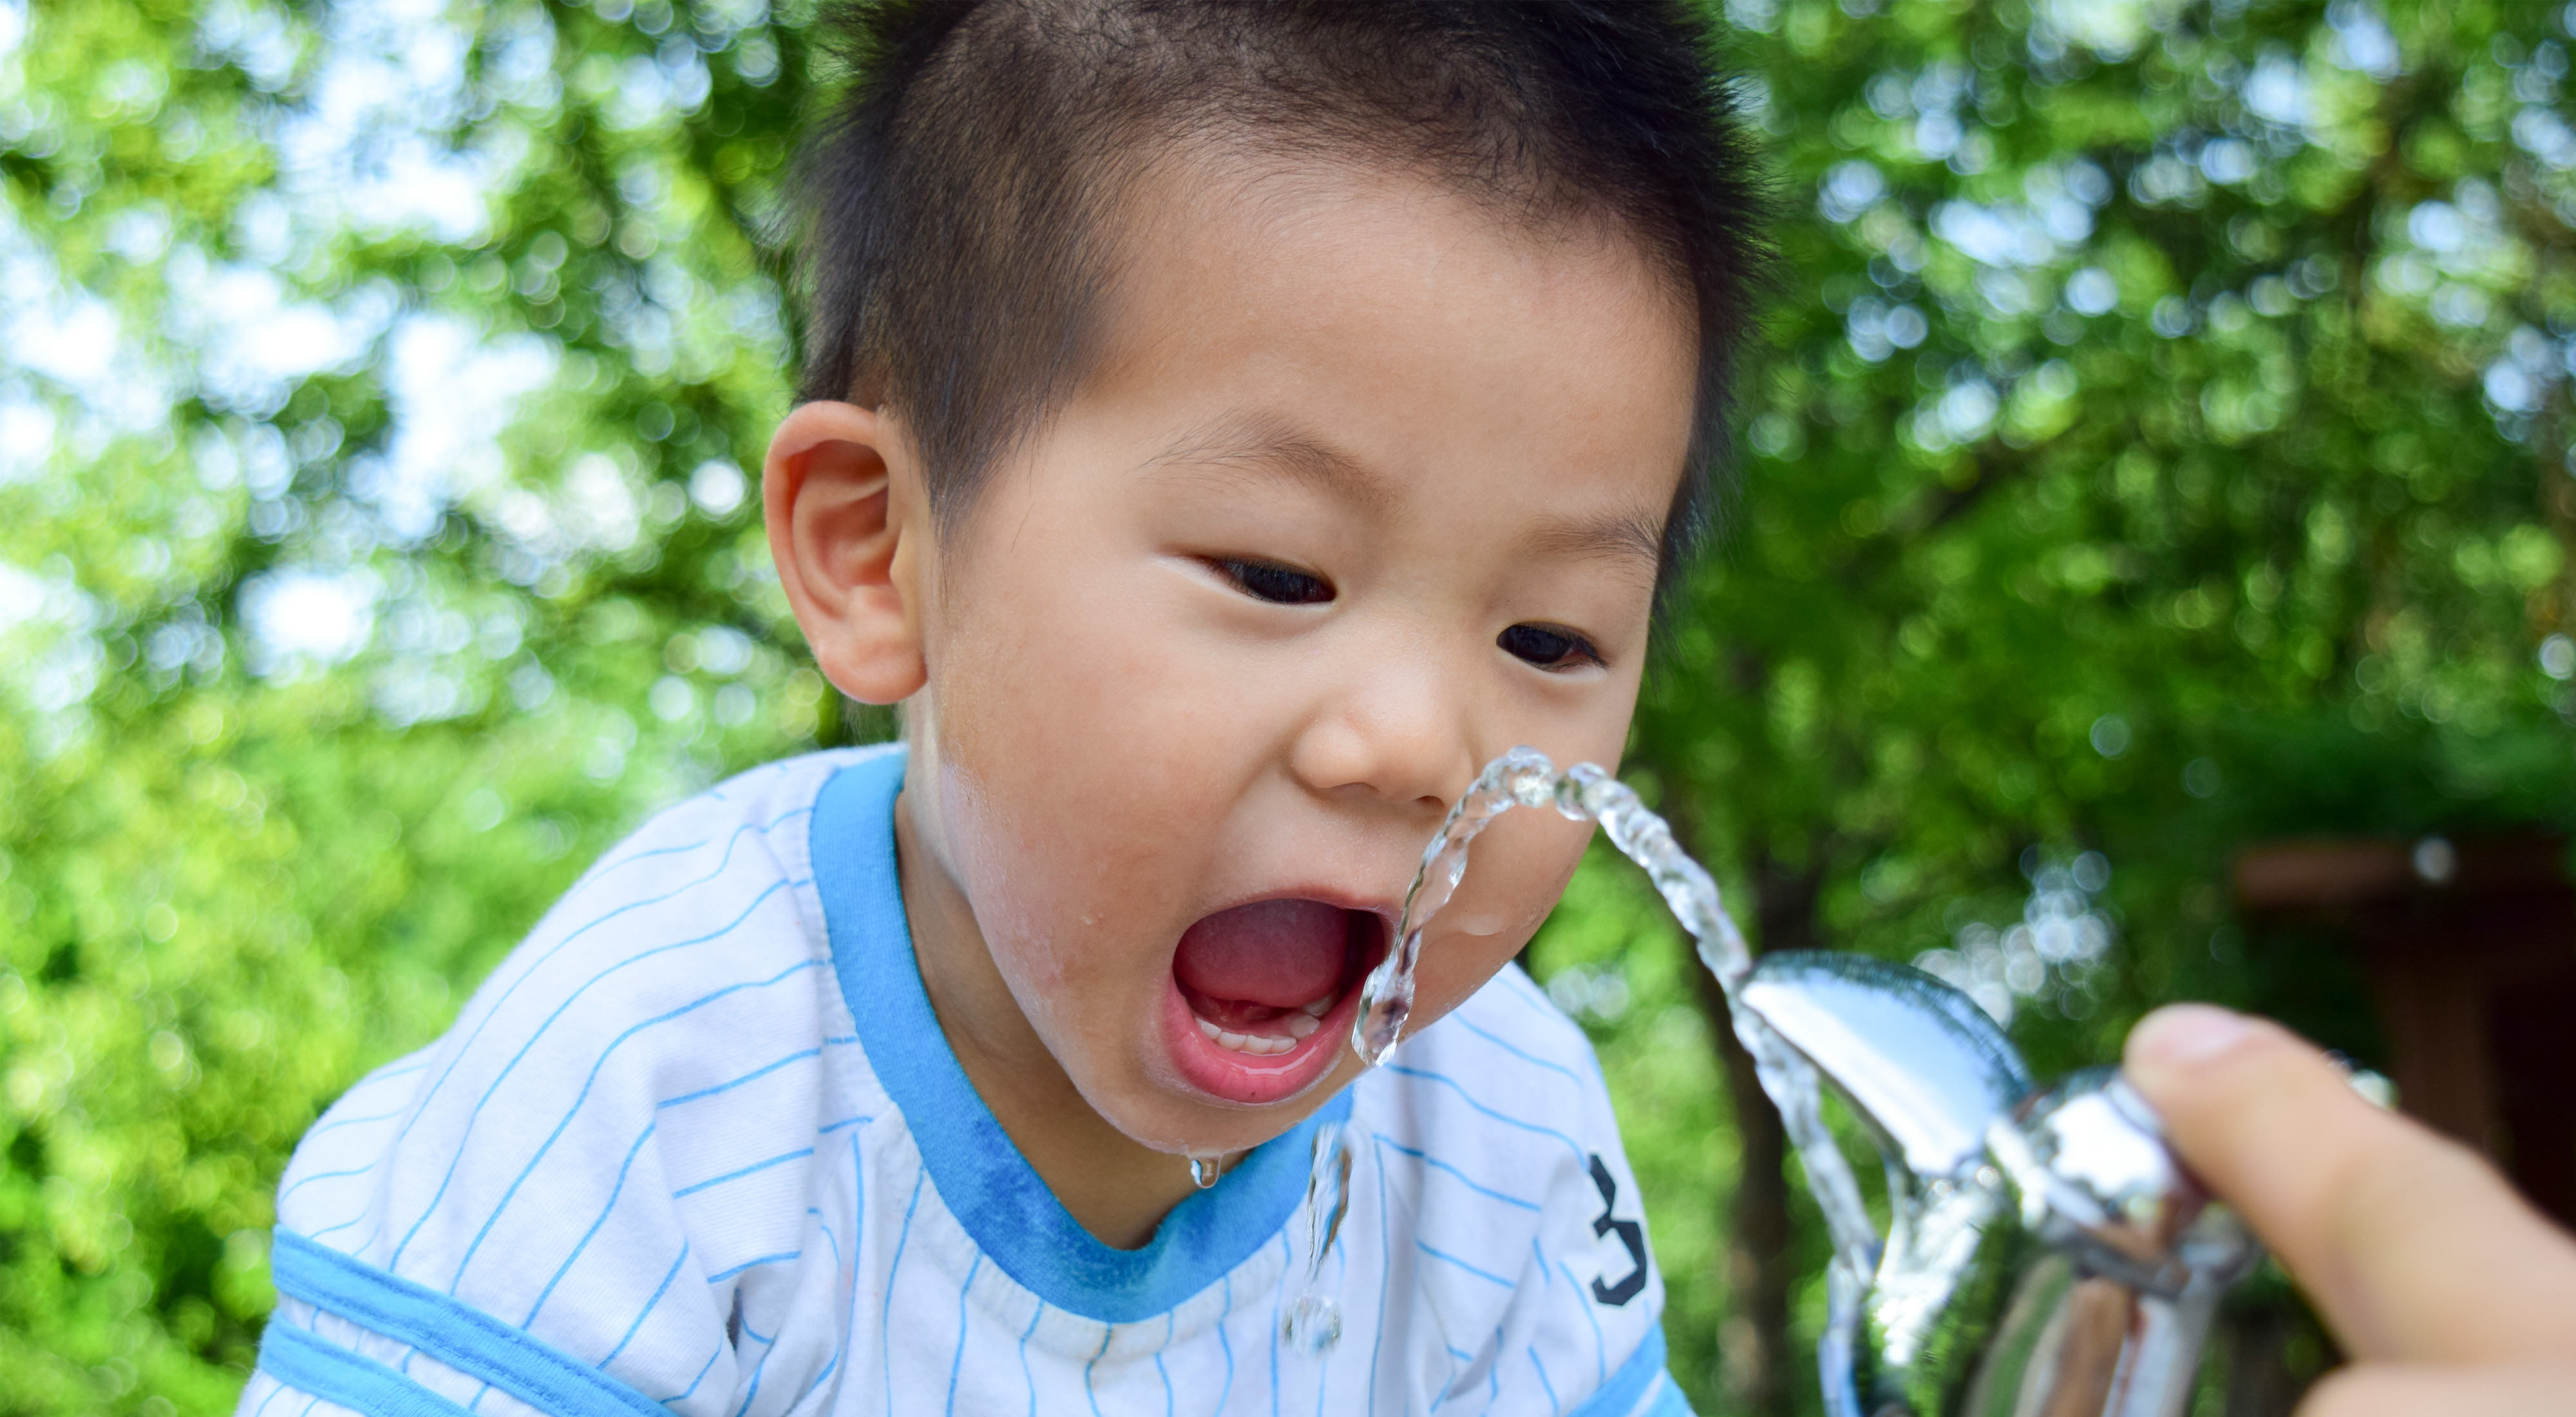 A boy drinks water out of a fountain.